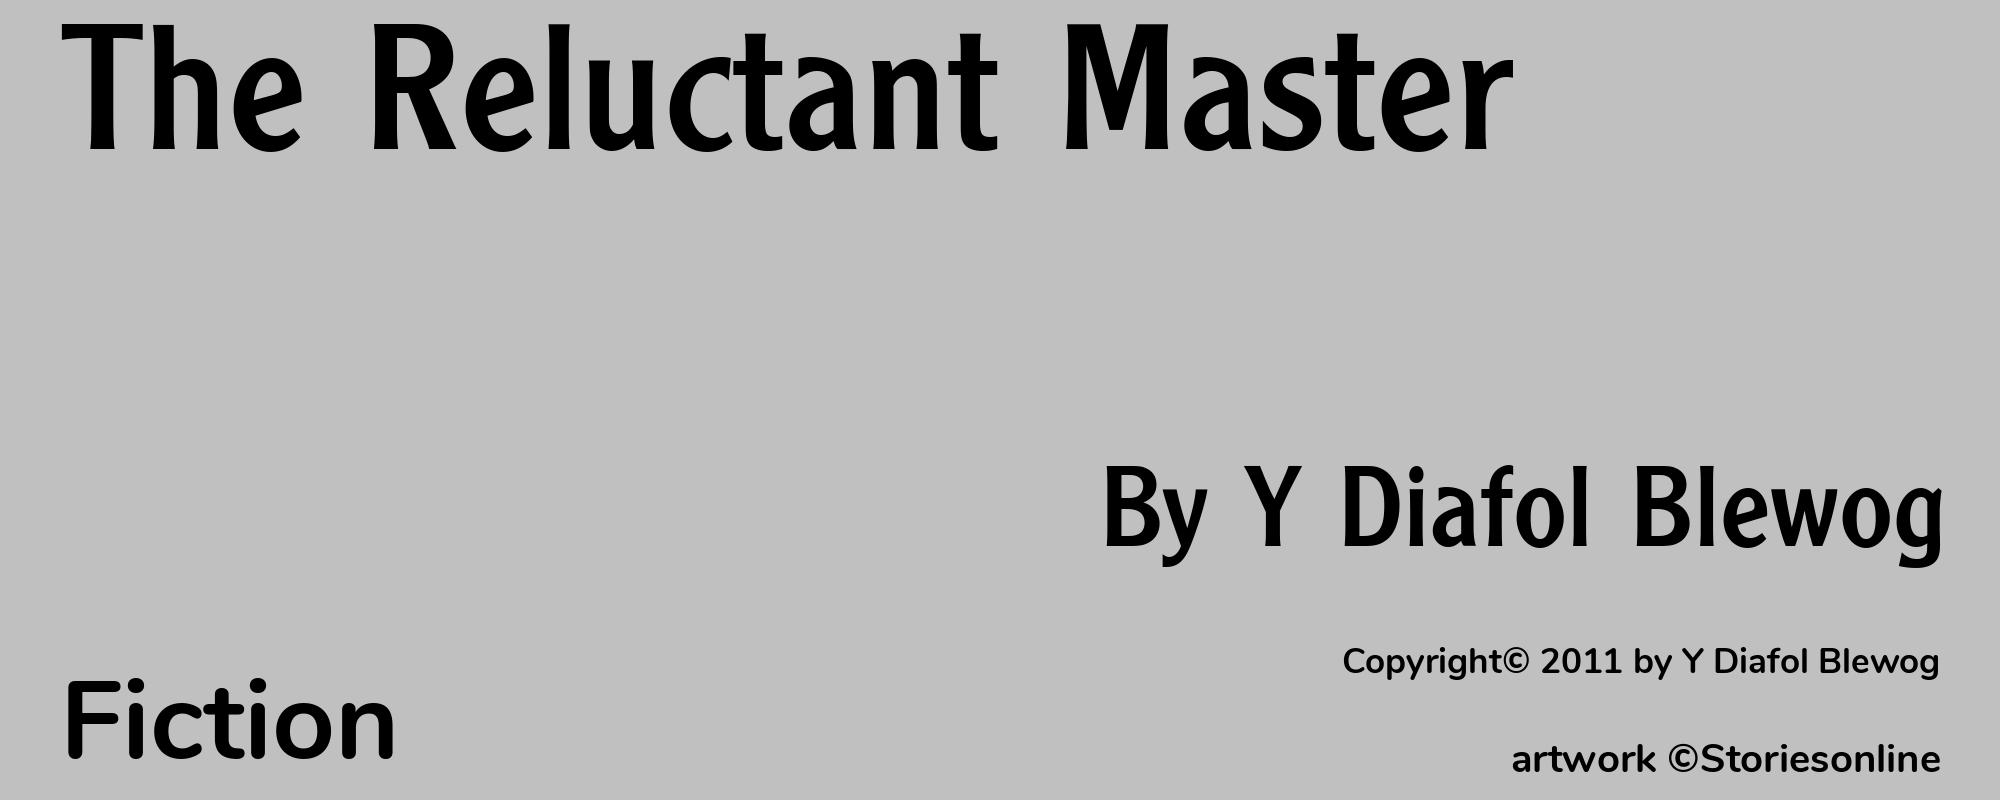 The Reluctant Master - Cover